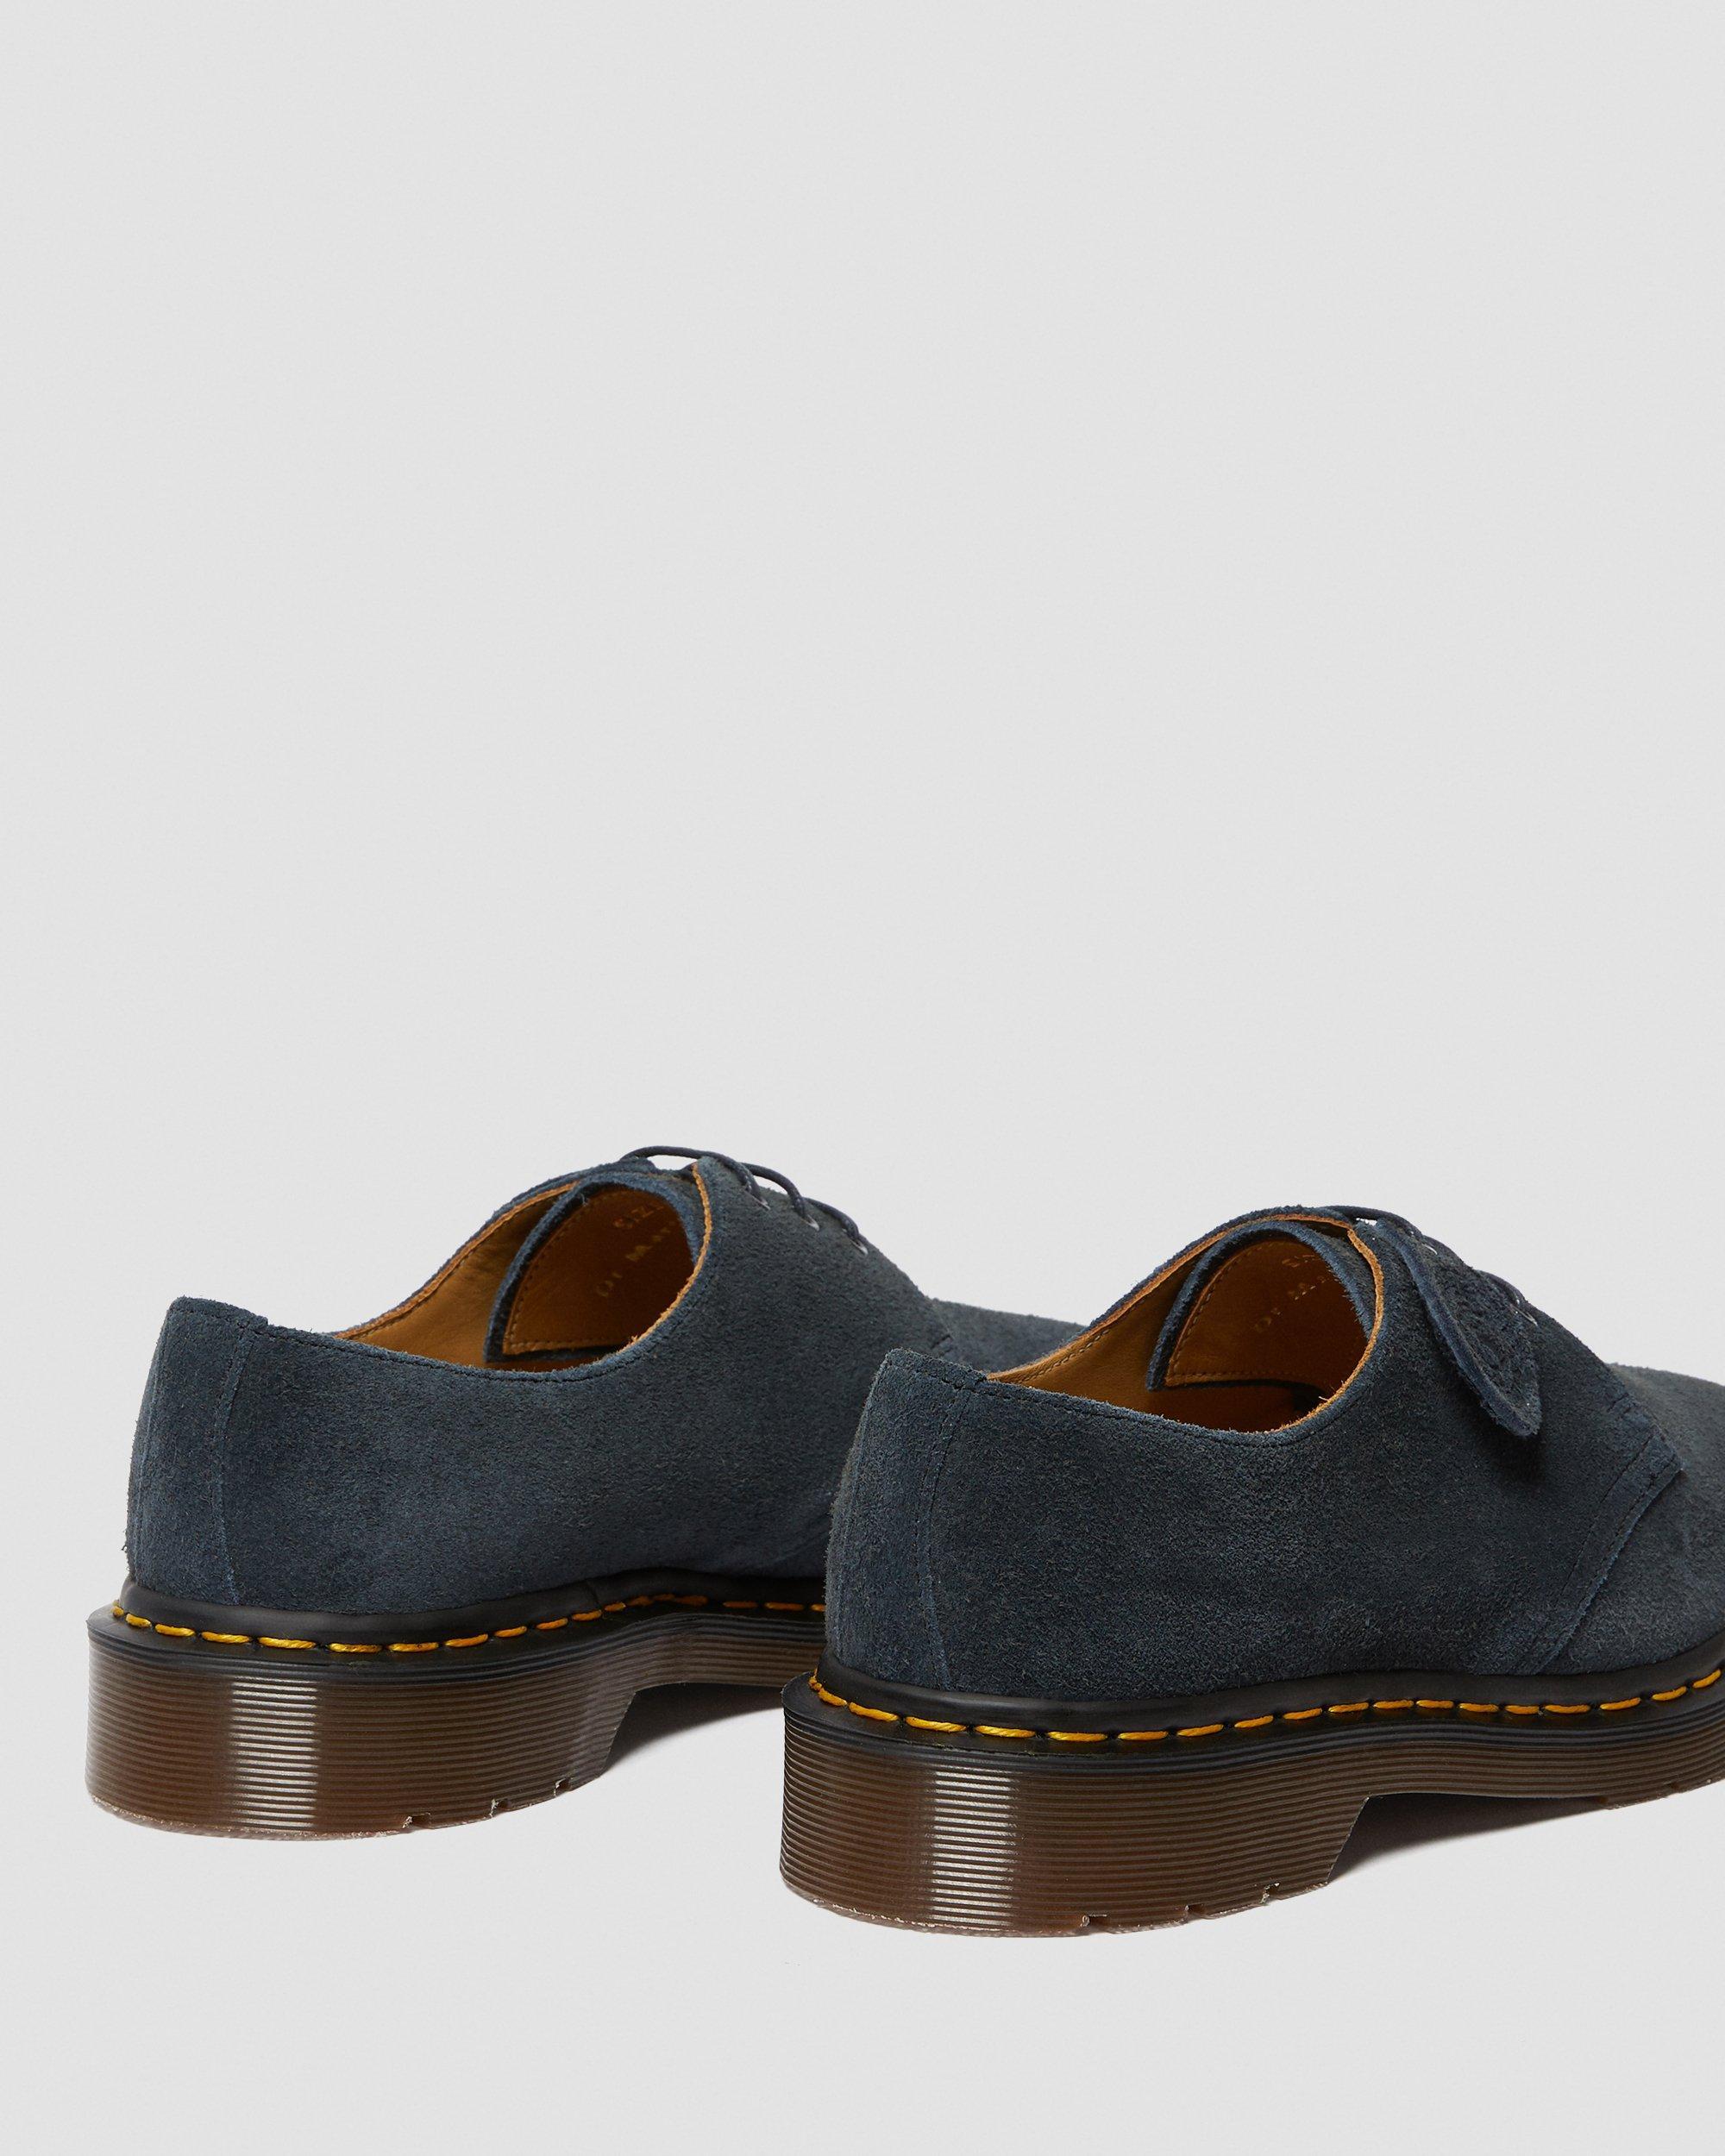 Dr. Martens 1461 Made In England Suede Oxford Shoes in Blue - Lyst